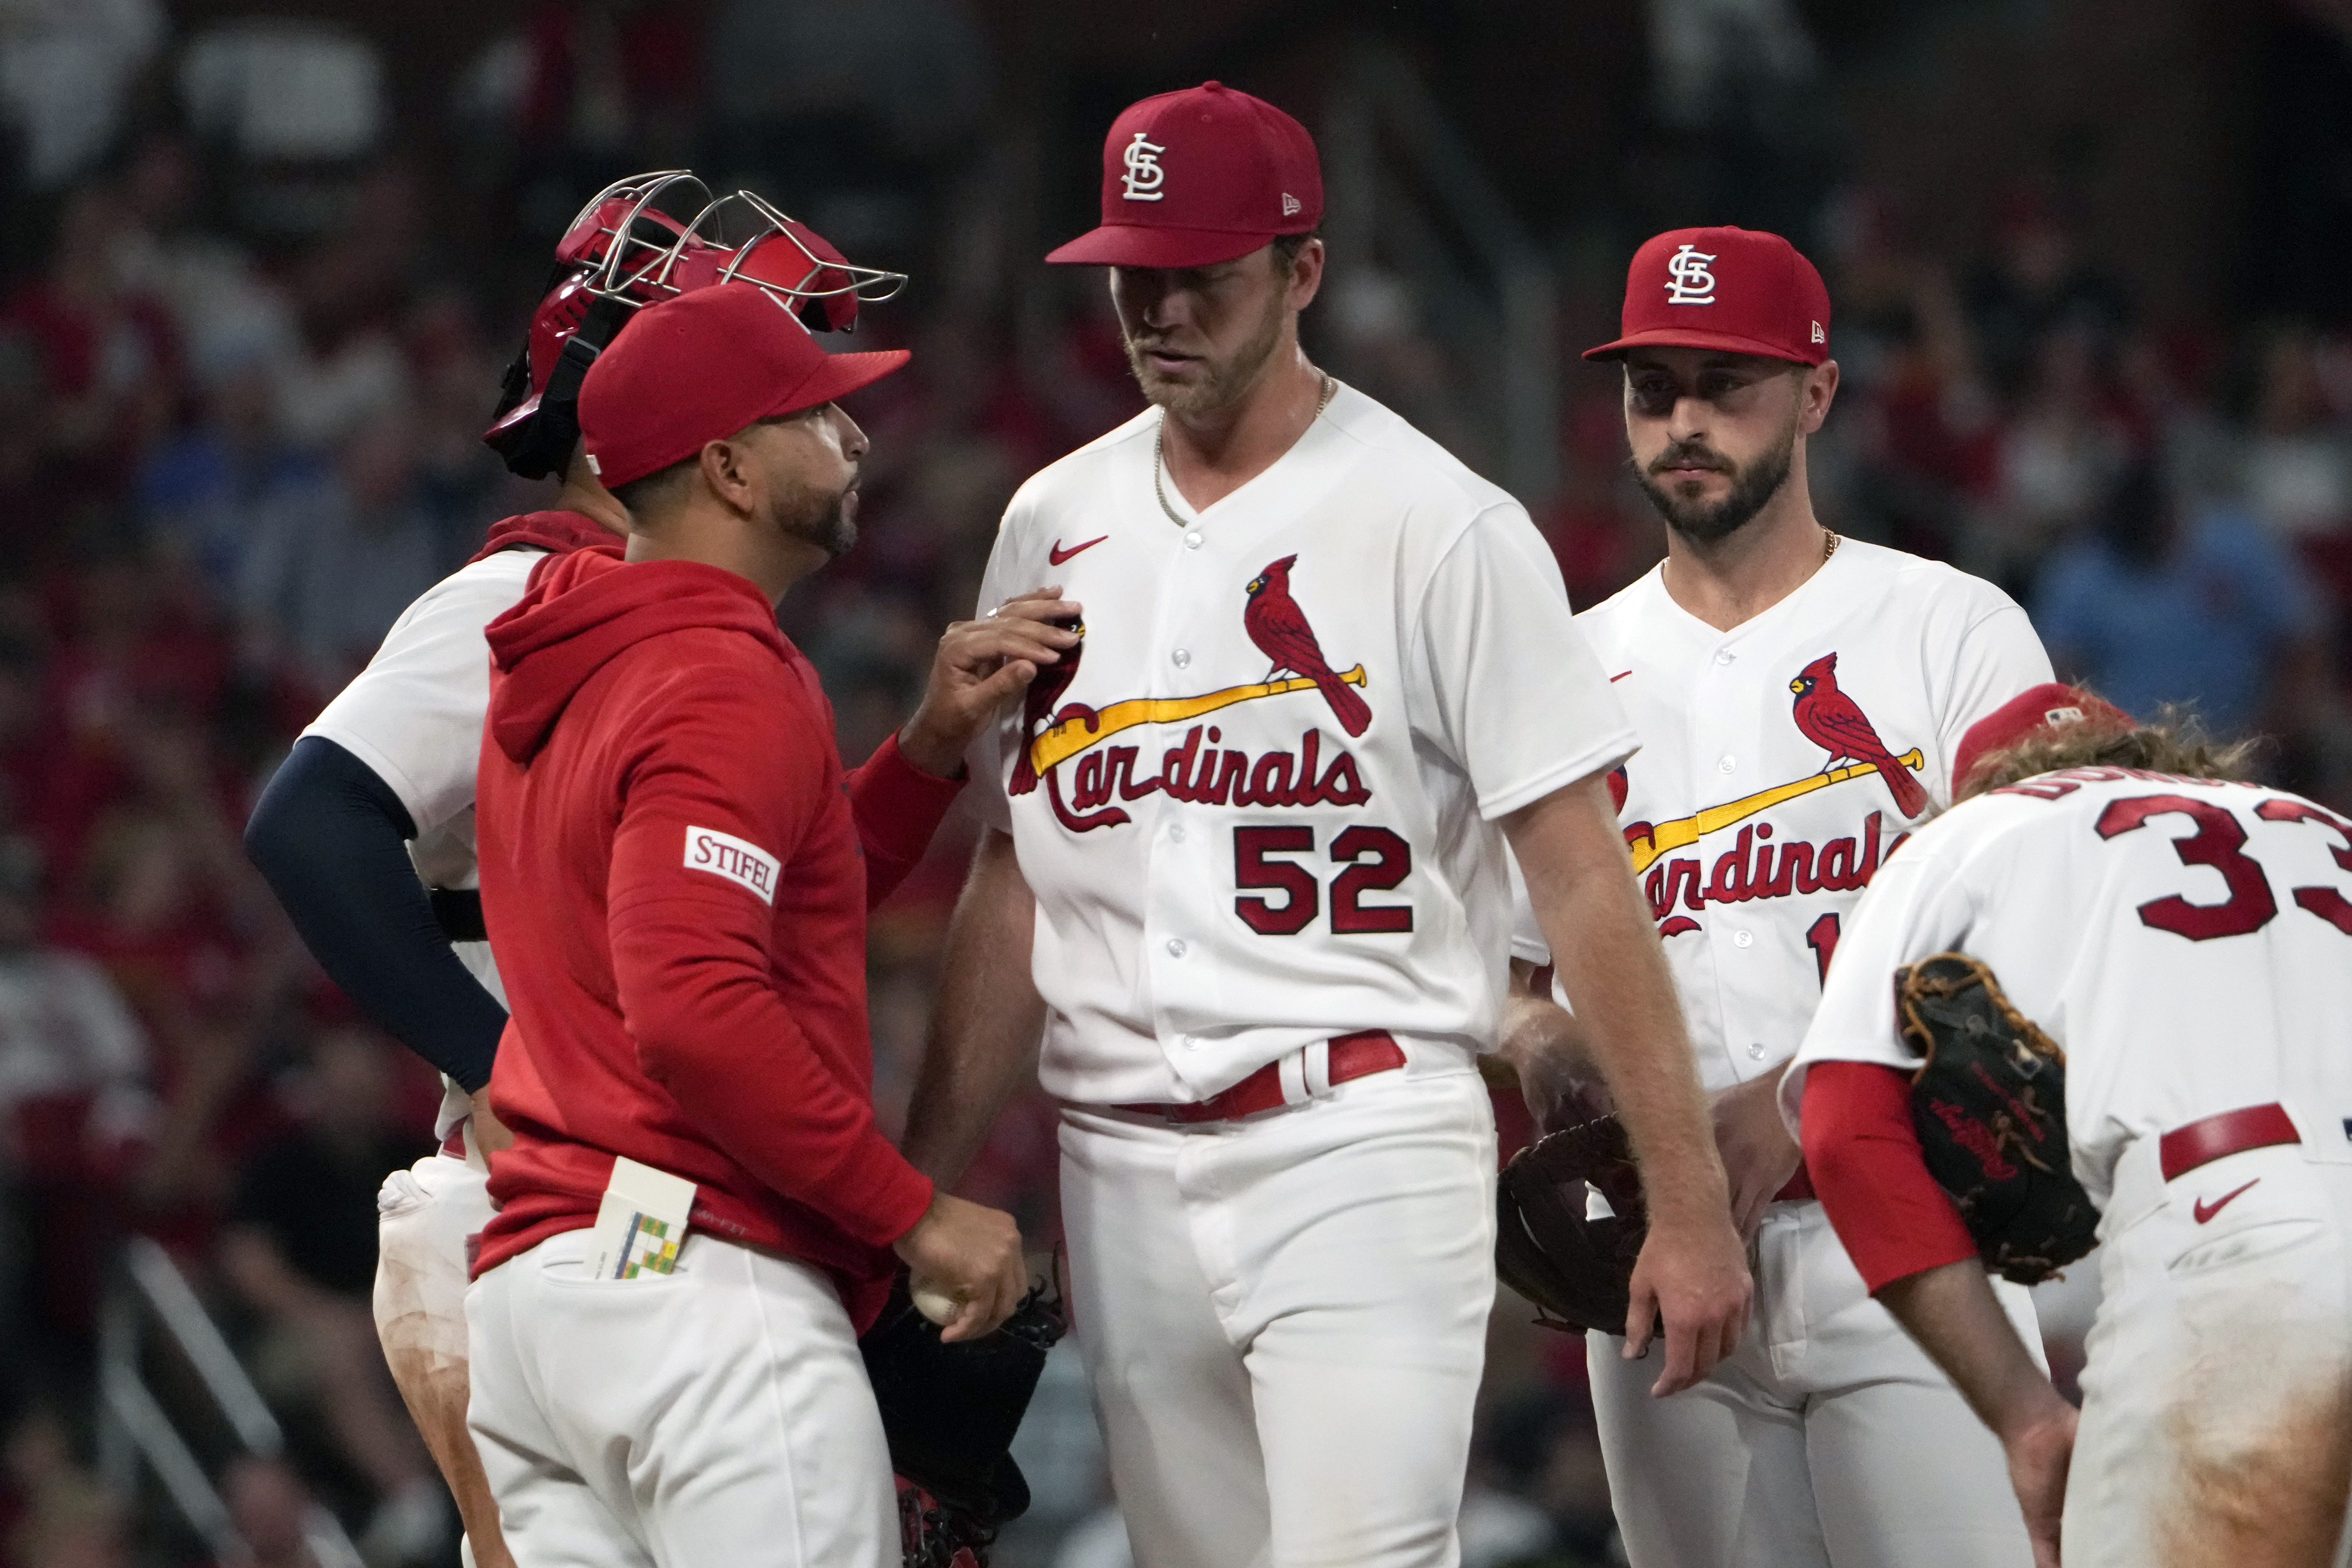 Though necessary, Liberatore demotion is the latest consequence of Cardinals'  puzzling decision-making